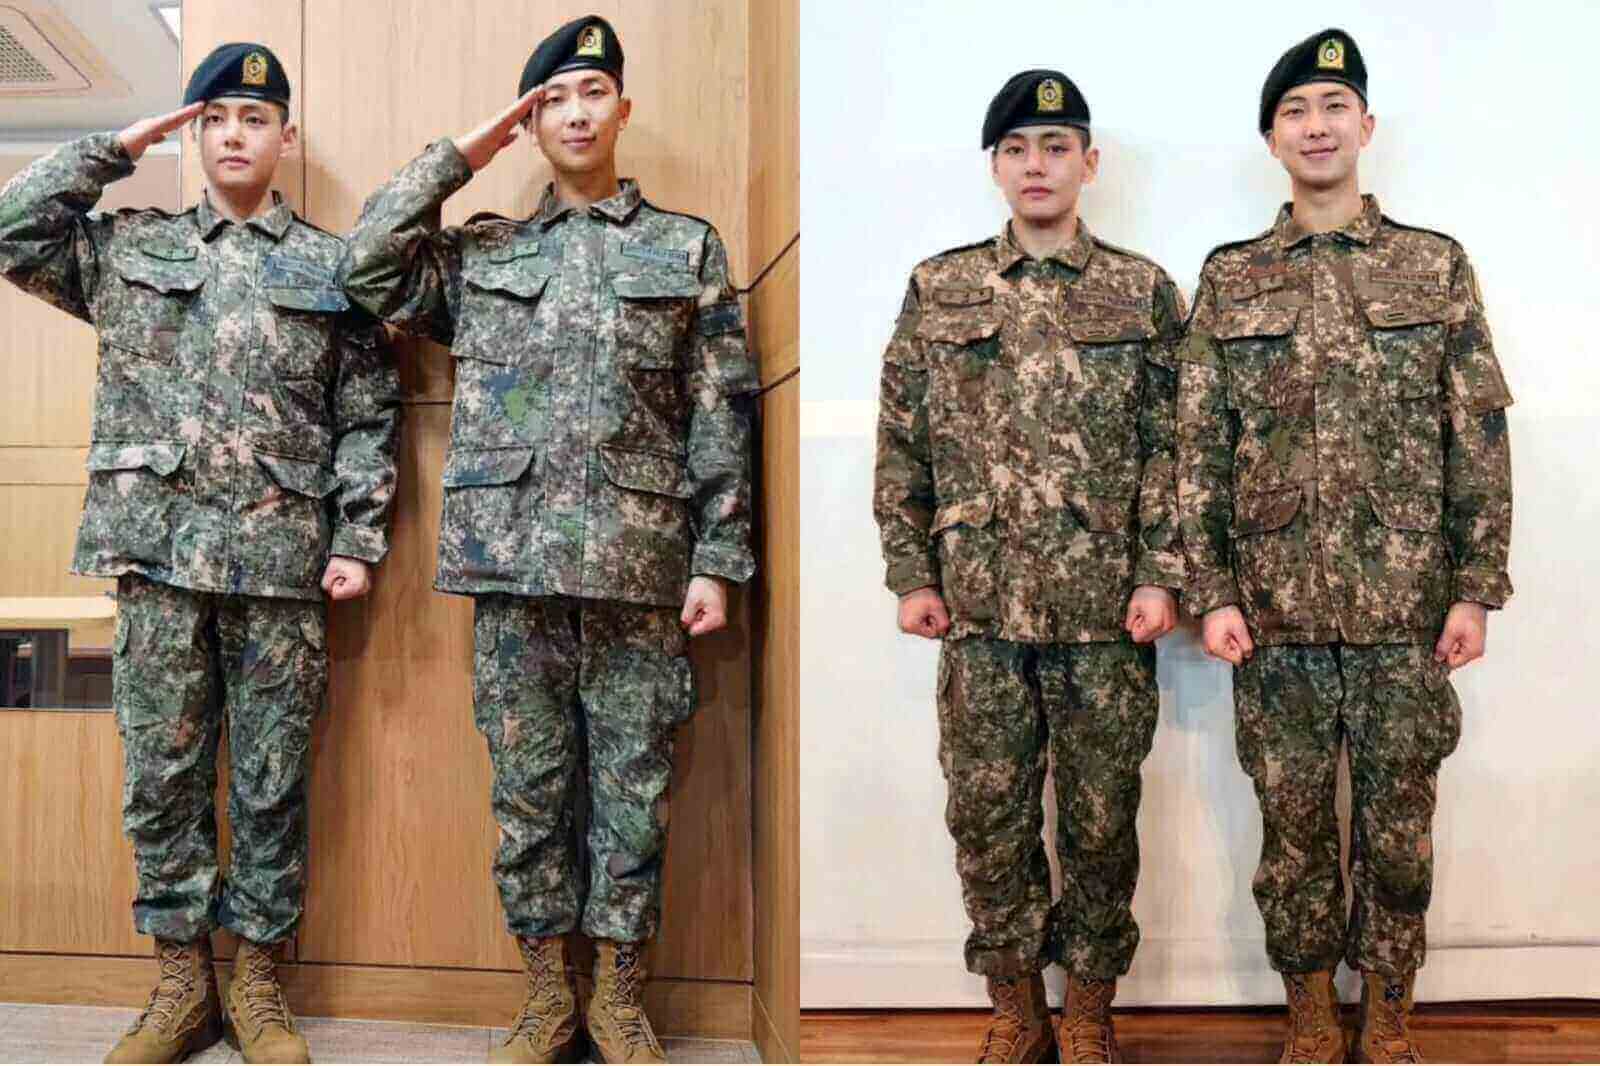 BTS's Taehyung and Namjoon Graduation Triumph Among Elite 6 at Nonsan Military Training Center Sparks Fan Pride, Unveiling V & RM's Military Photo